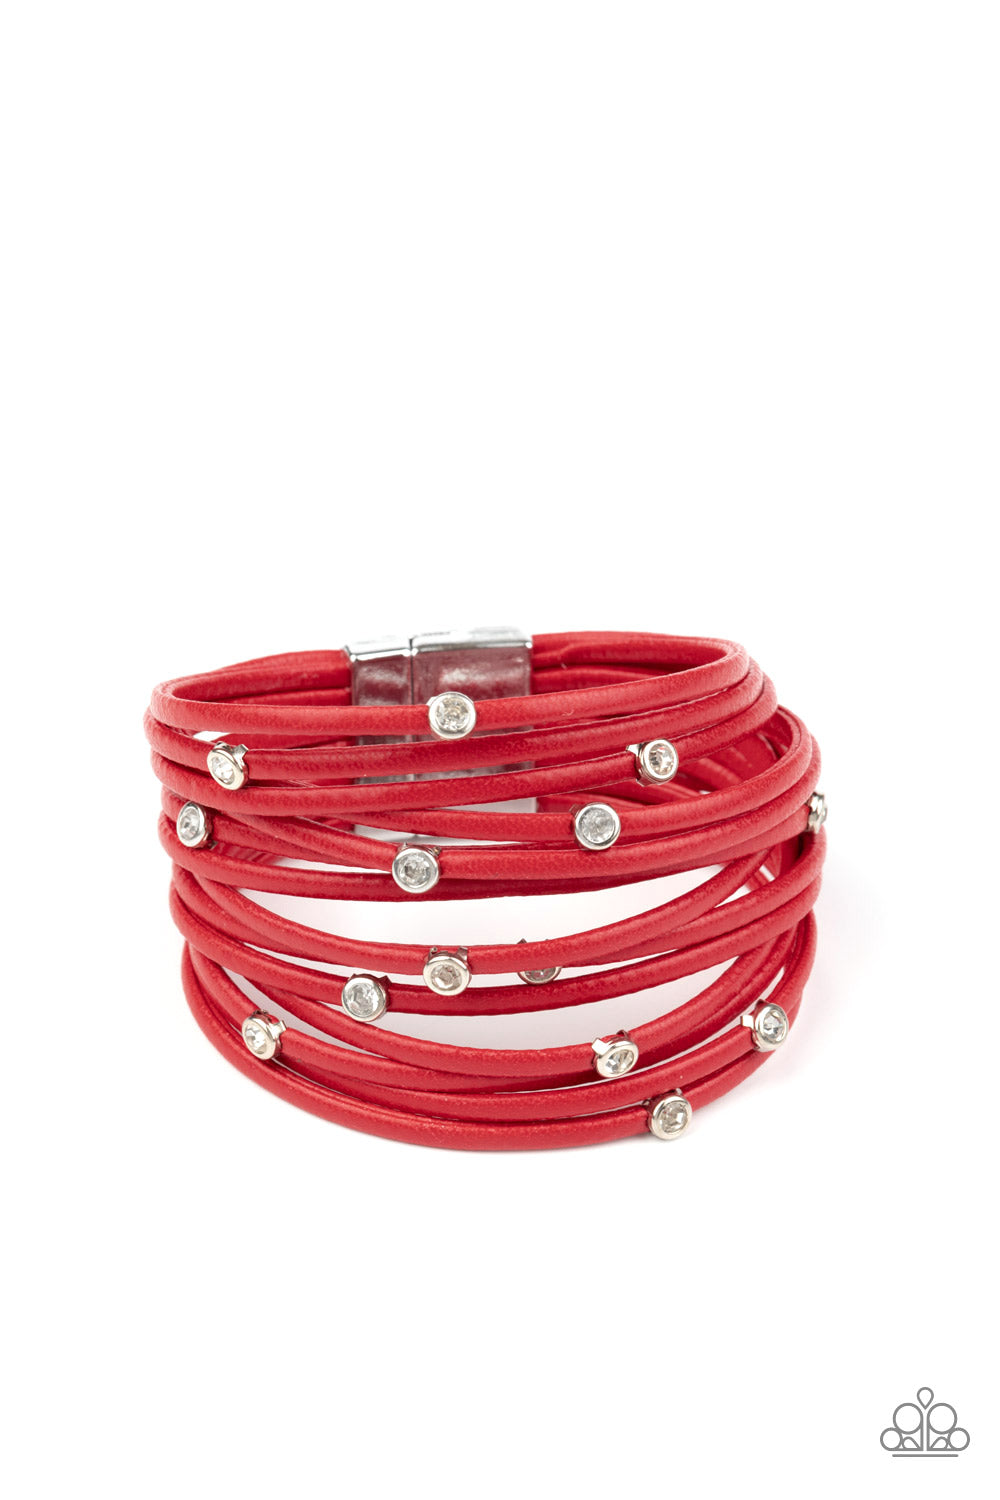 Fearlessly Layered - Red bracelet 1838